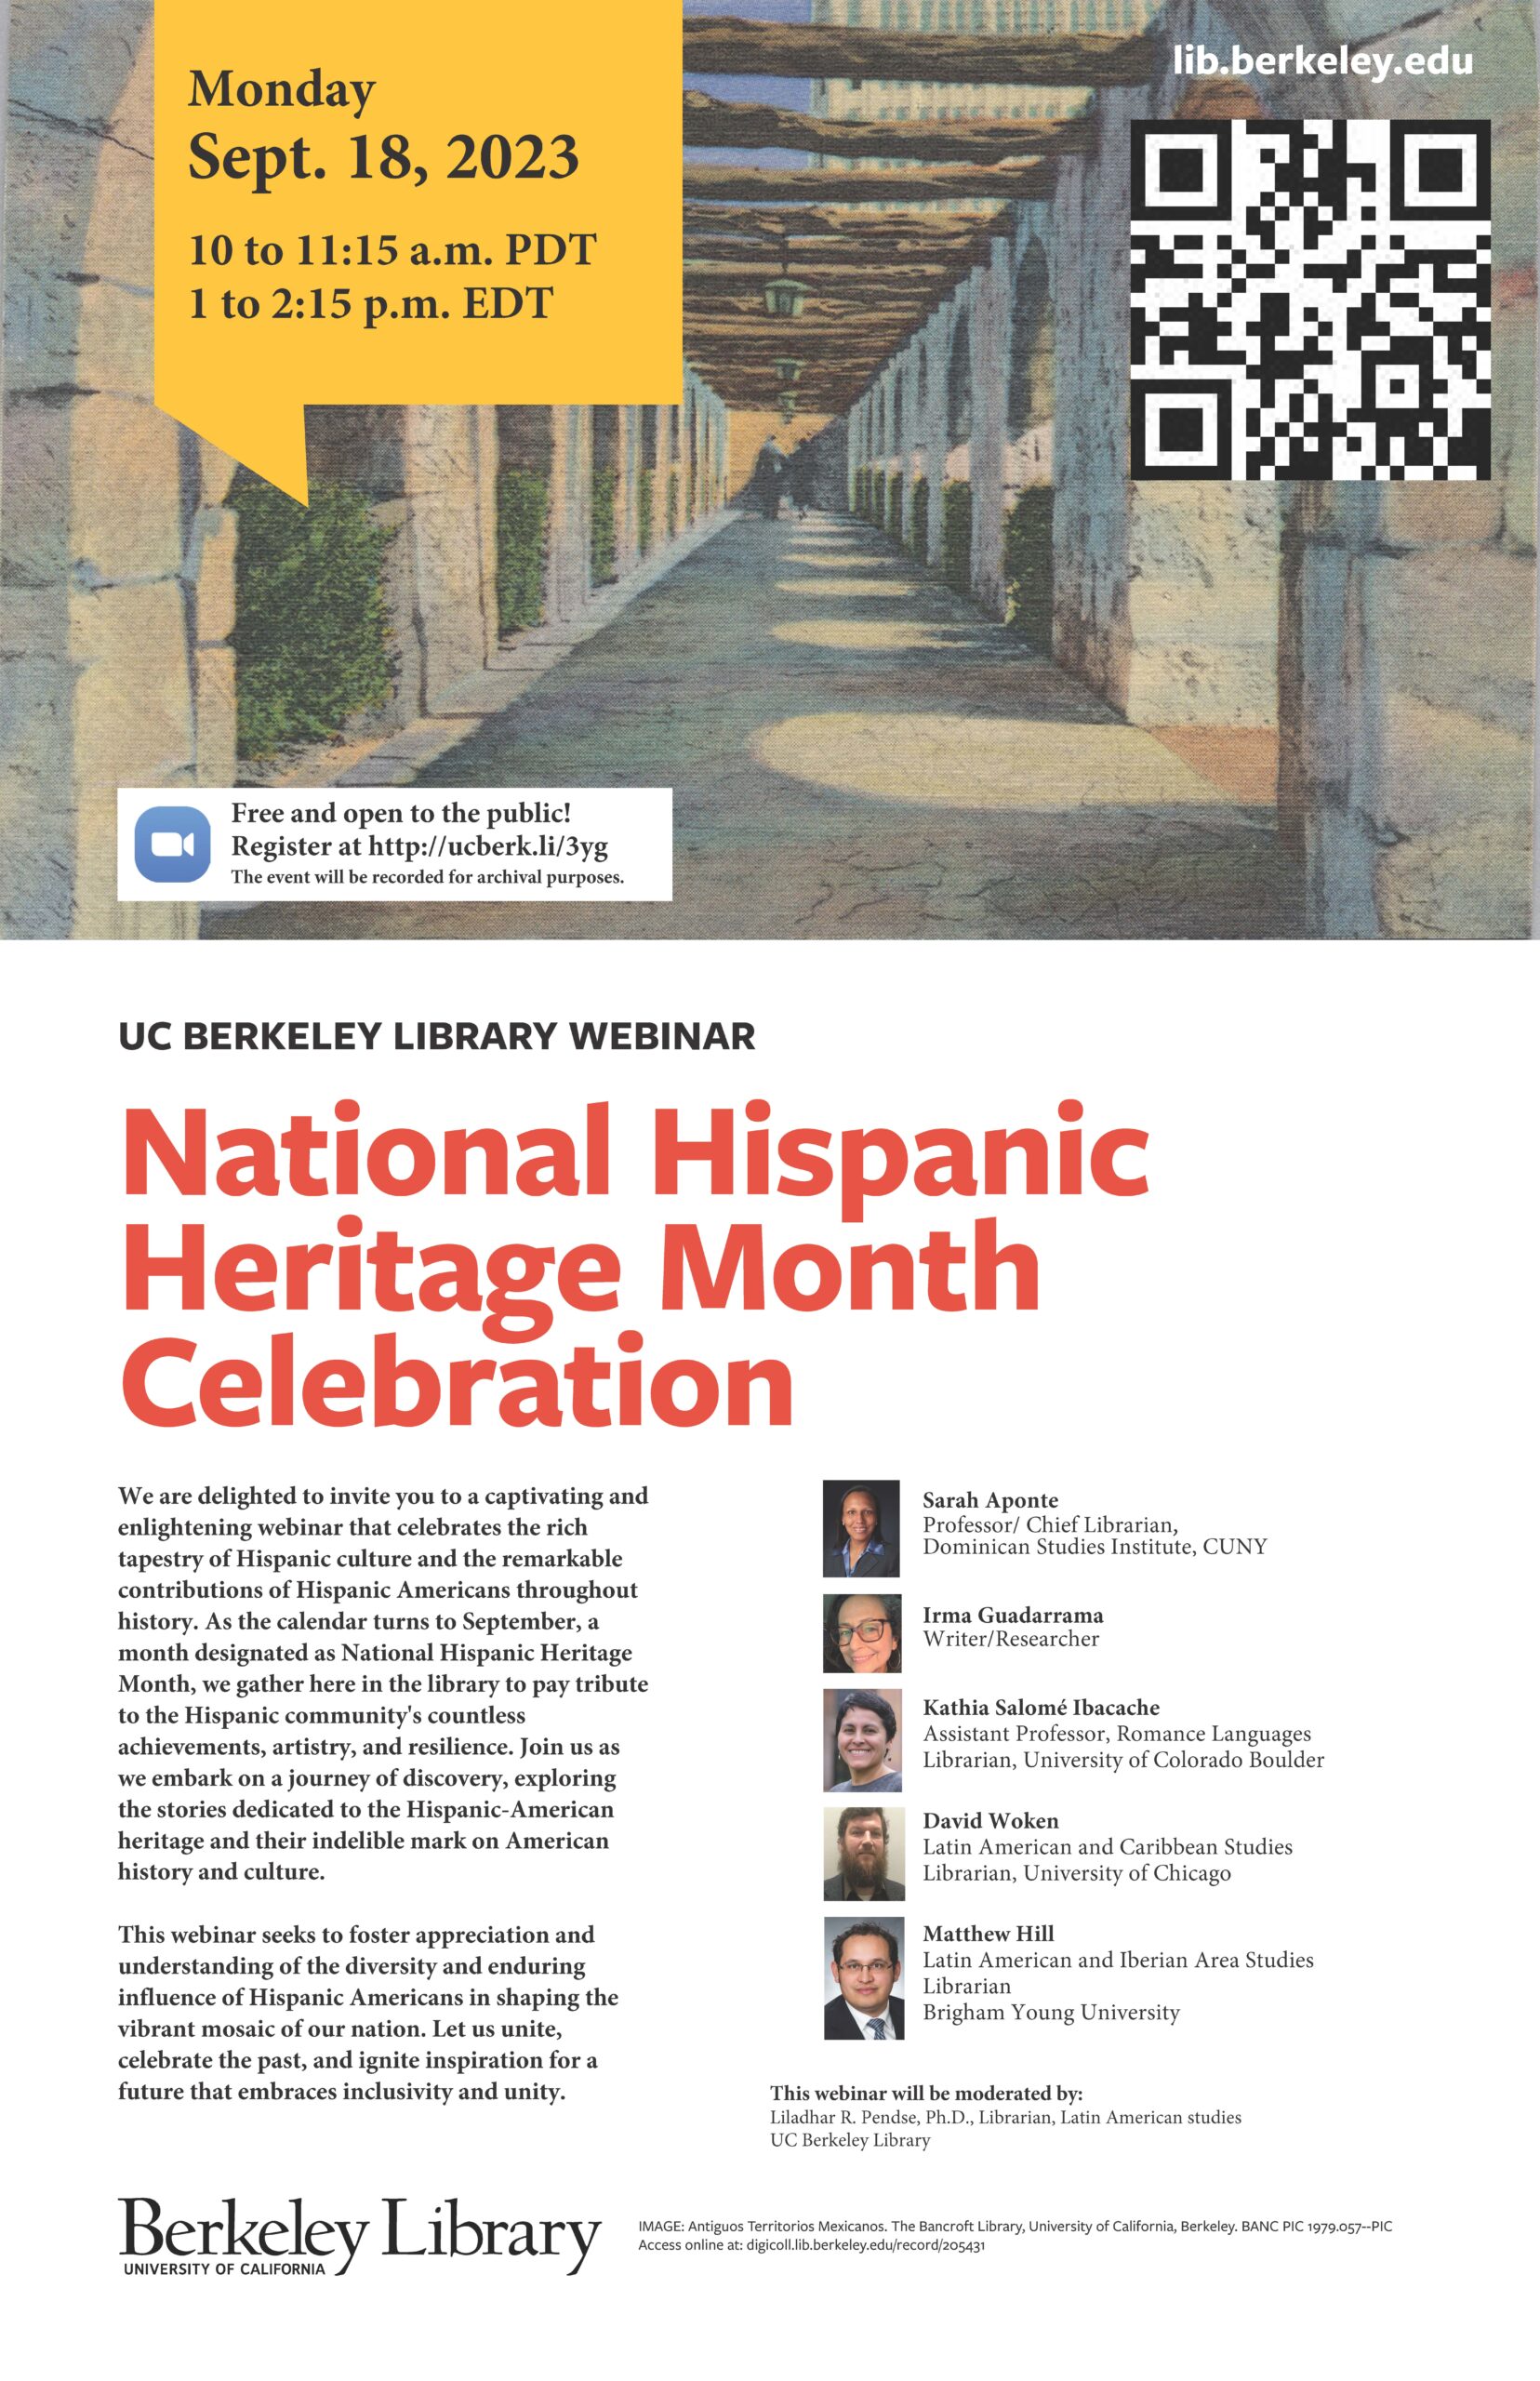 This image speaks about National Hispanic Heritage Month Webinar Celebration at UC Berkeley Library that will take place on September eighteenth of this year, 2023. The image provides basic information same as in the text of this post about how to register for this webinar as well as information about the speakers who will participate in it.